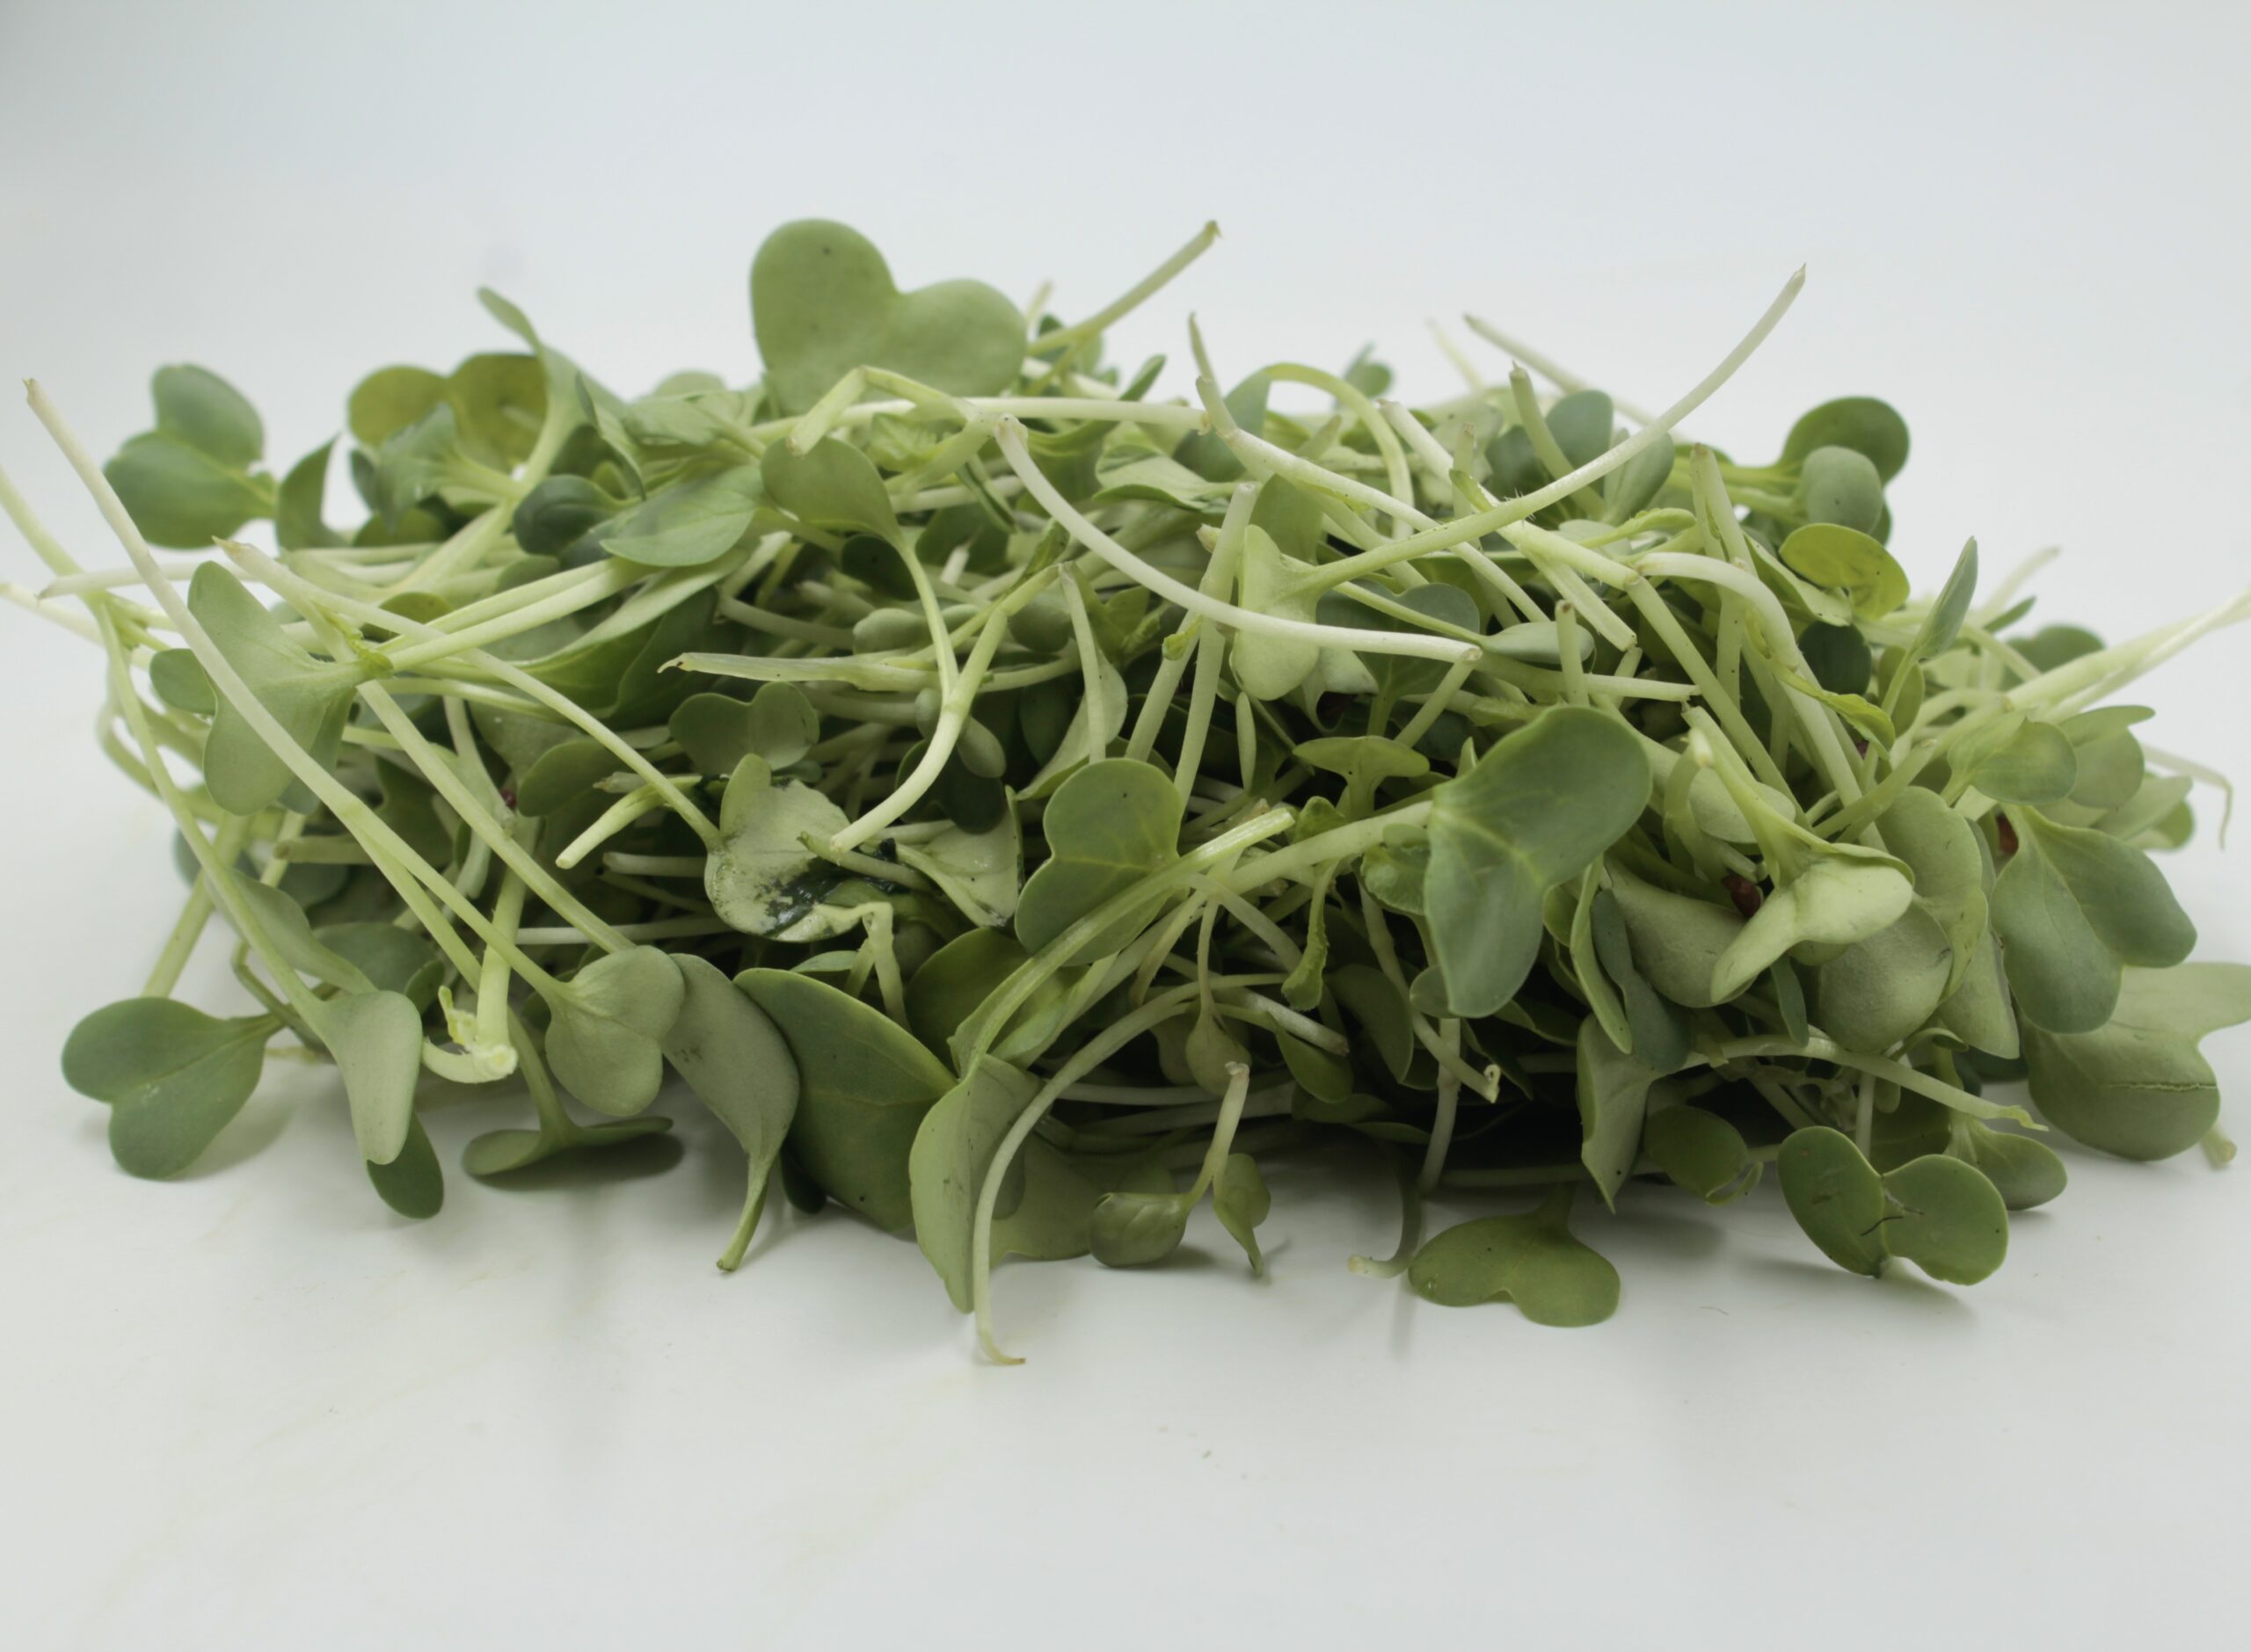 Microgrrn Radish is the Vgetable from Ecotic Veg Microgreen type vegtable smqal leaves